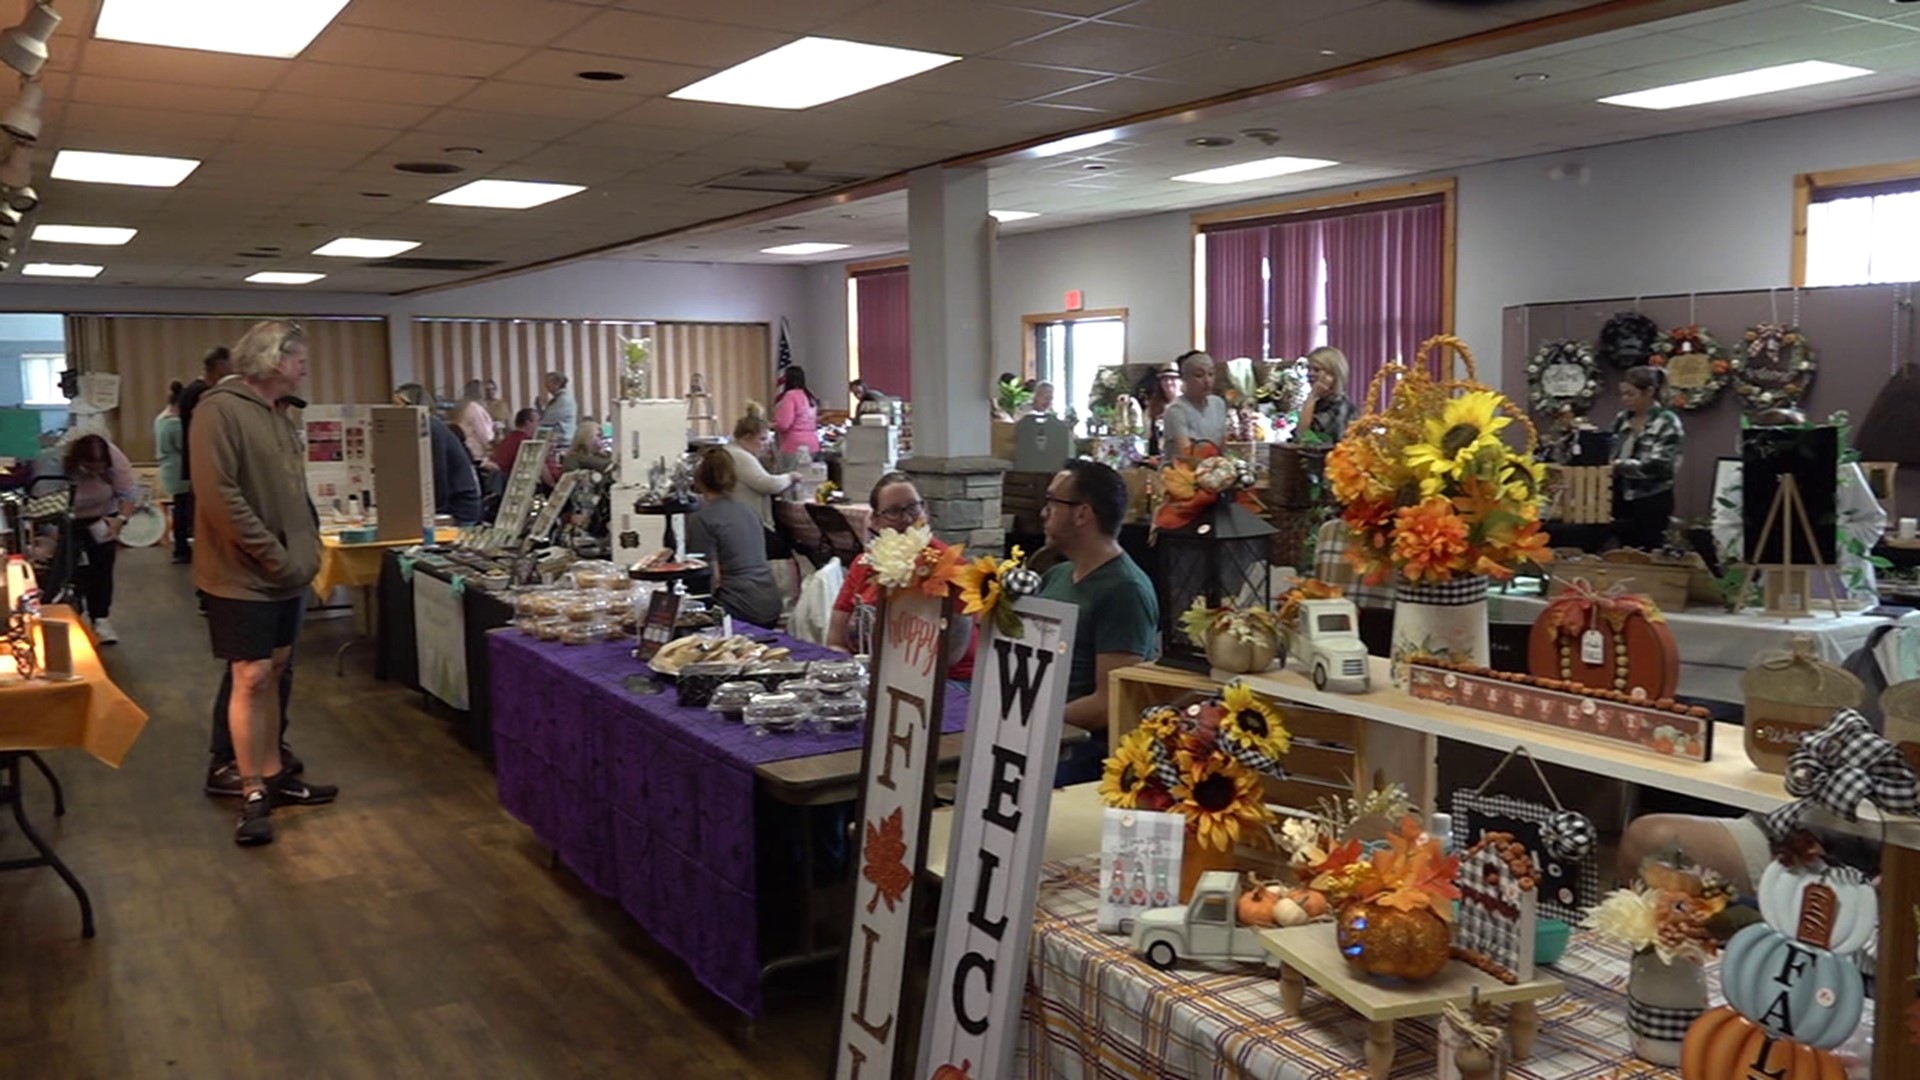 Folks in one part of Luzerne County were taking advantage of the crisp fall weather and small businesses in the area.